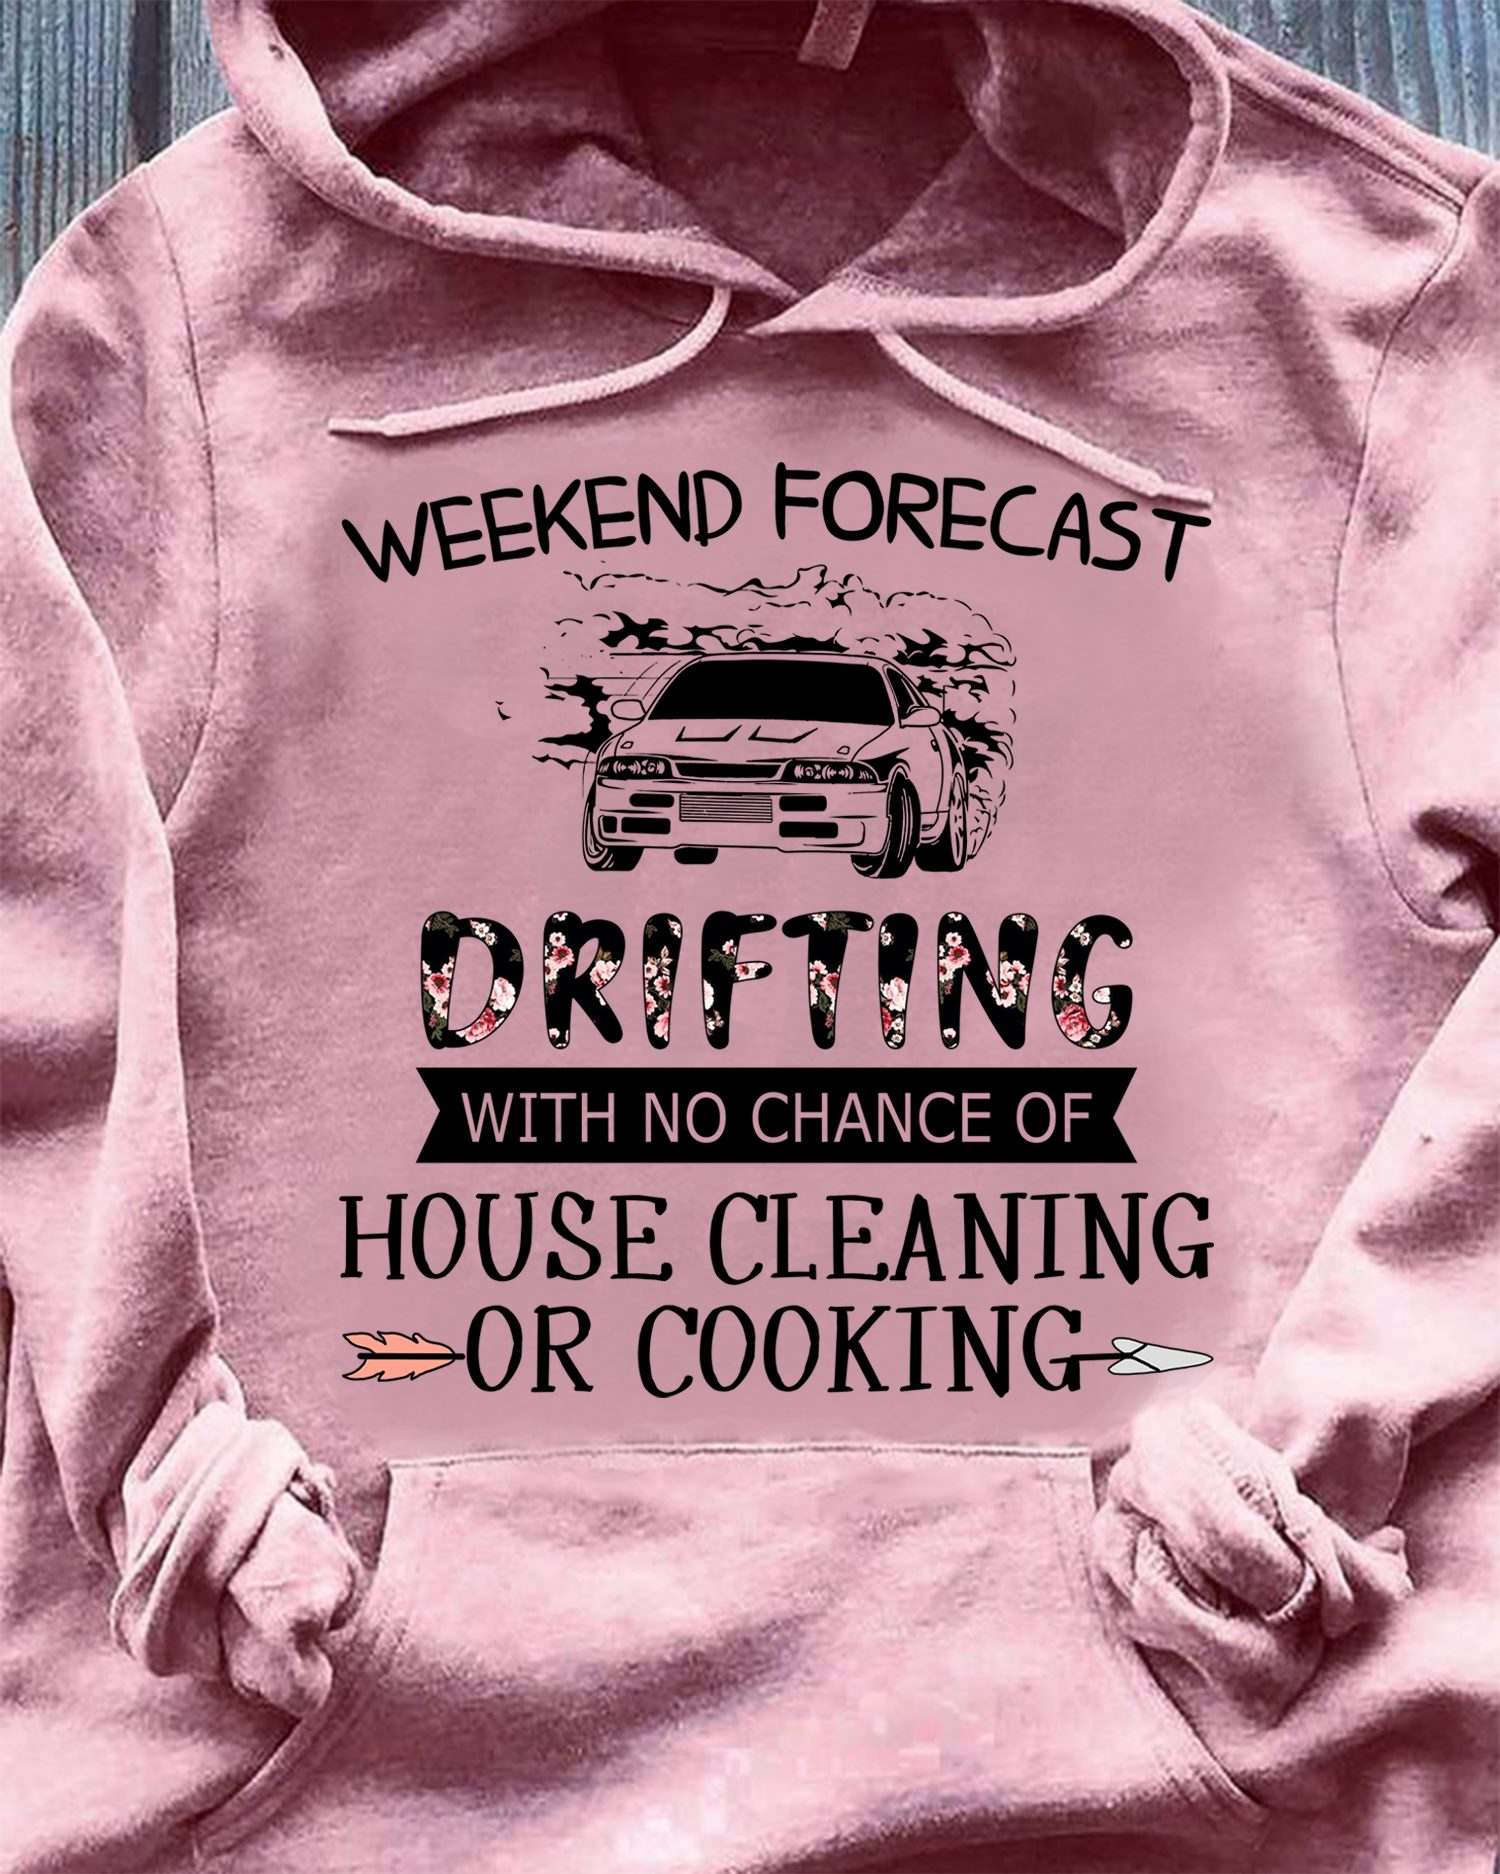 Weekend forecast drifting with no chance of house cleaning or cooking - Love racing and drifting